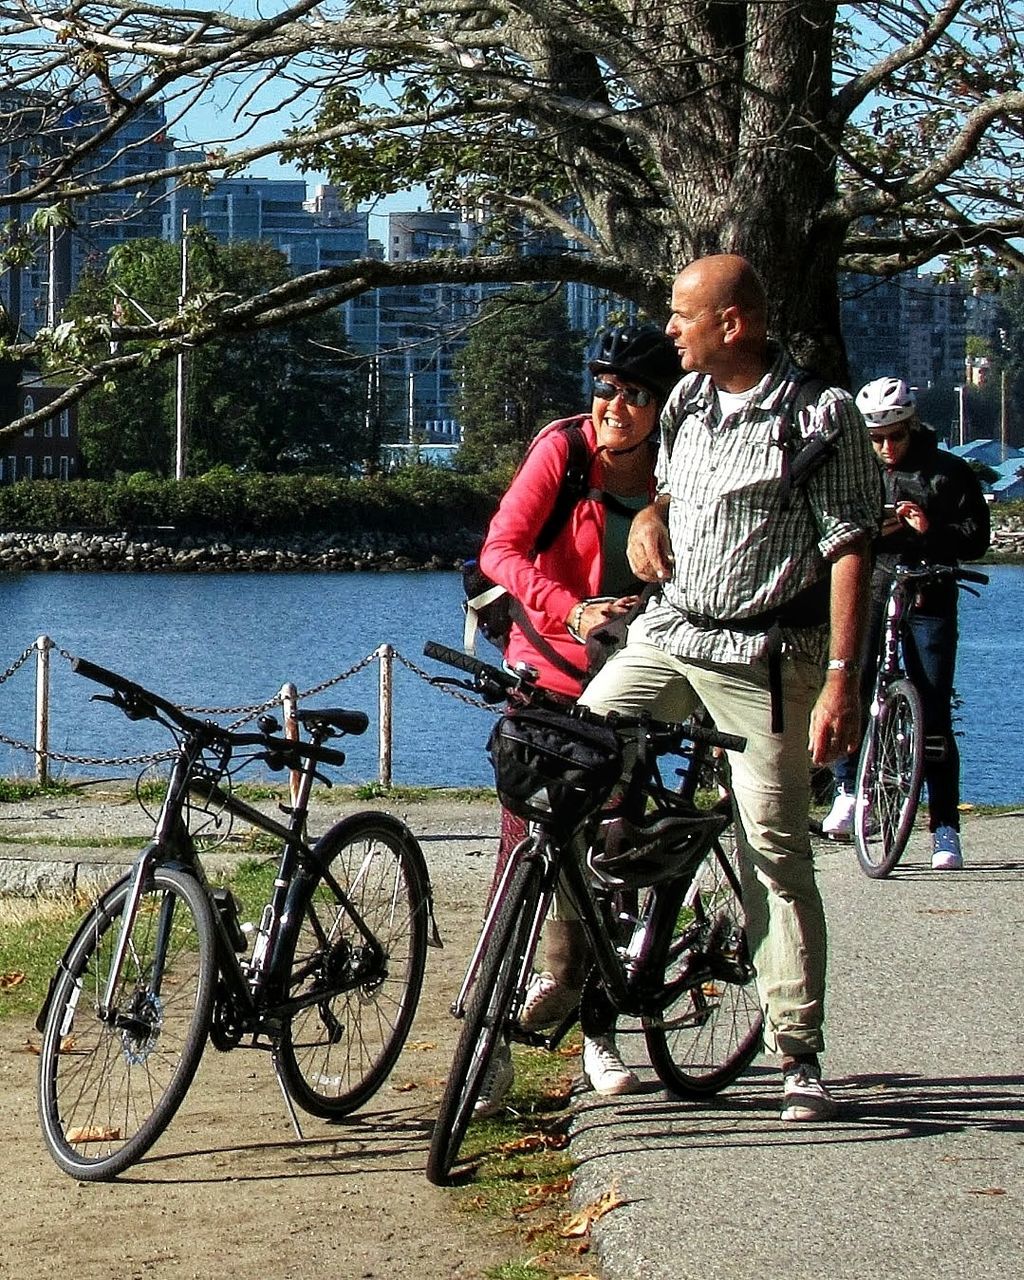 bicycle, transportation, cycling, two people, full length, men, tree, adult, leisure activity, nature, togetherness, lifestyles, casual clothing, mode of transportation, day, mountain bike, women, vehicle, plant, city, sports equipment, activity, sports, land vehicle, young adult, architecture, road cycling, friendship, smiling, endurance sports, sunlight, outdoors, female, emotion, happiness, bonding, water, mature adult, built structure, cycle sport, riding, standing